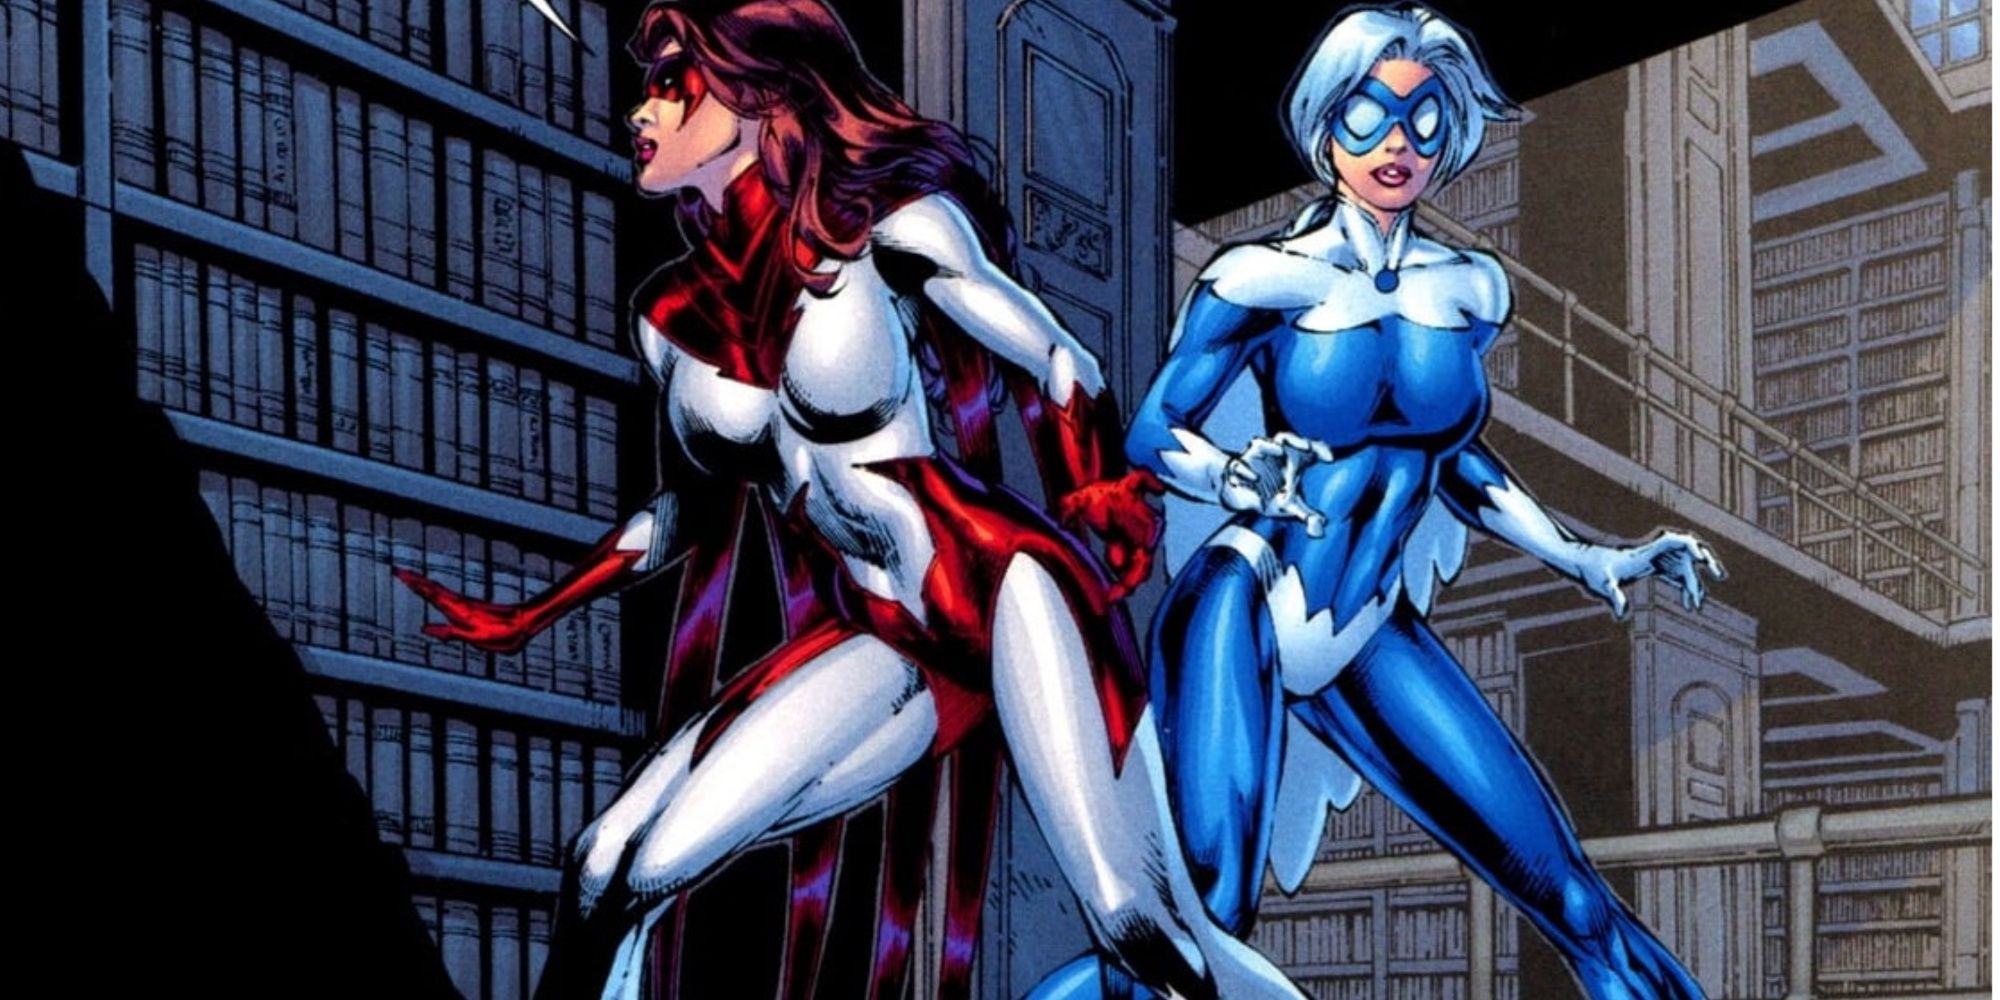 Hawk And Dove (Holly and Dawn Granger) from the comics